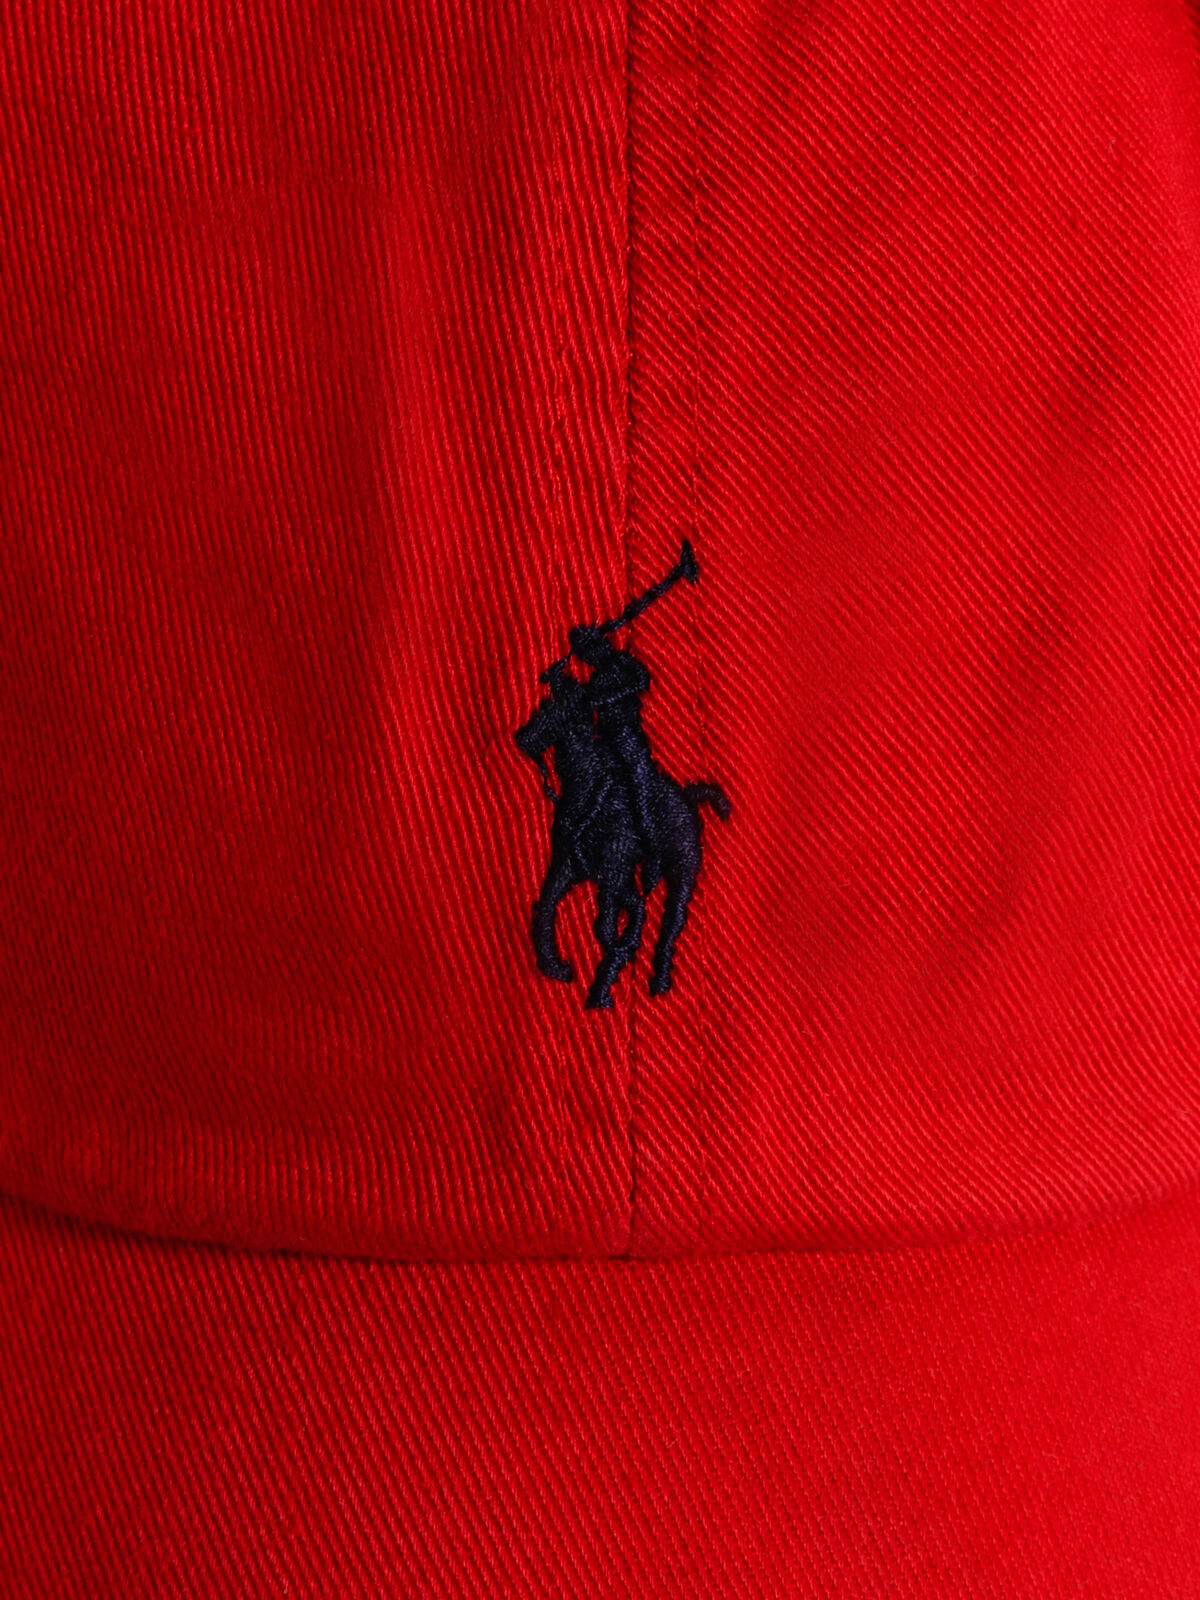 Polo Chino Baseball Cap in Red